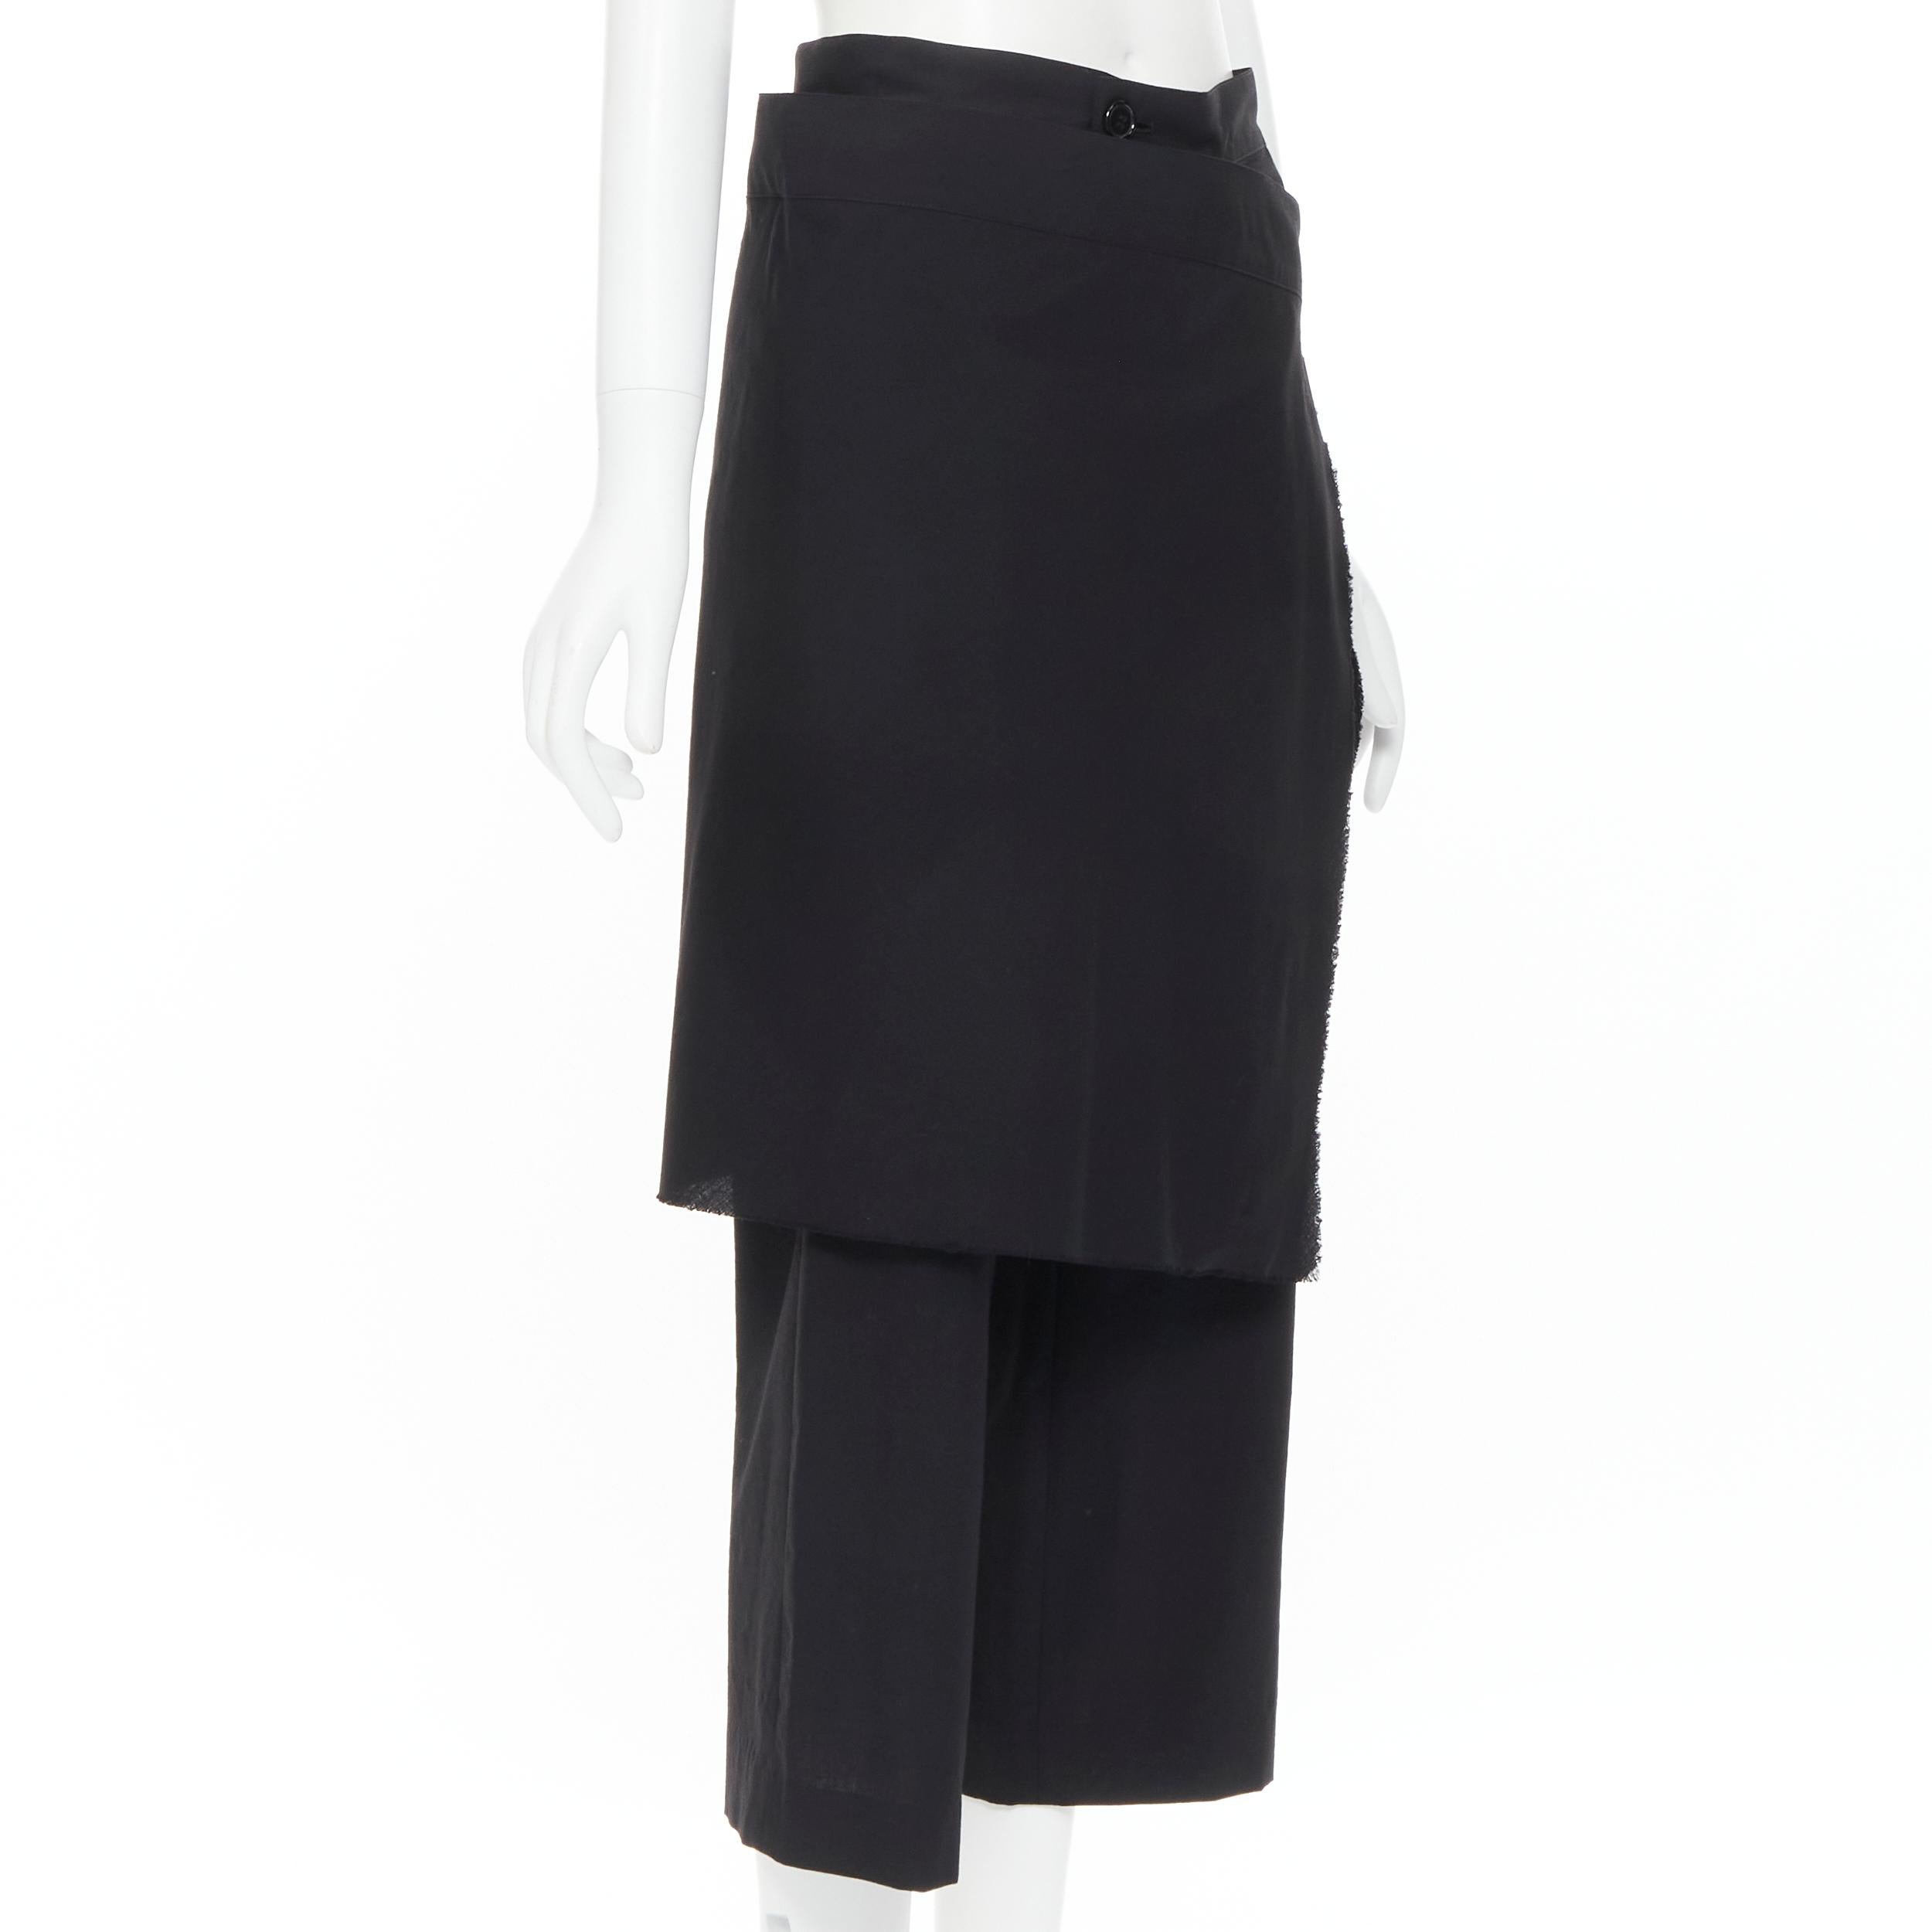 a type of skirt layered over the trousers